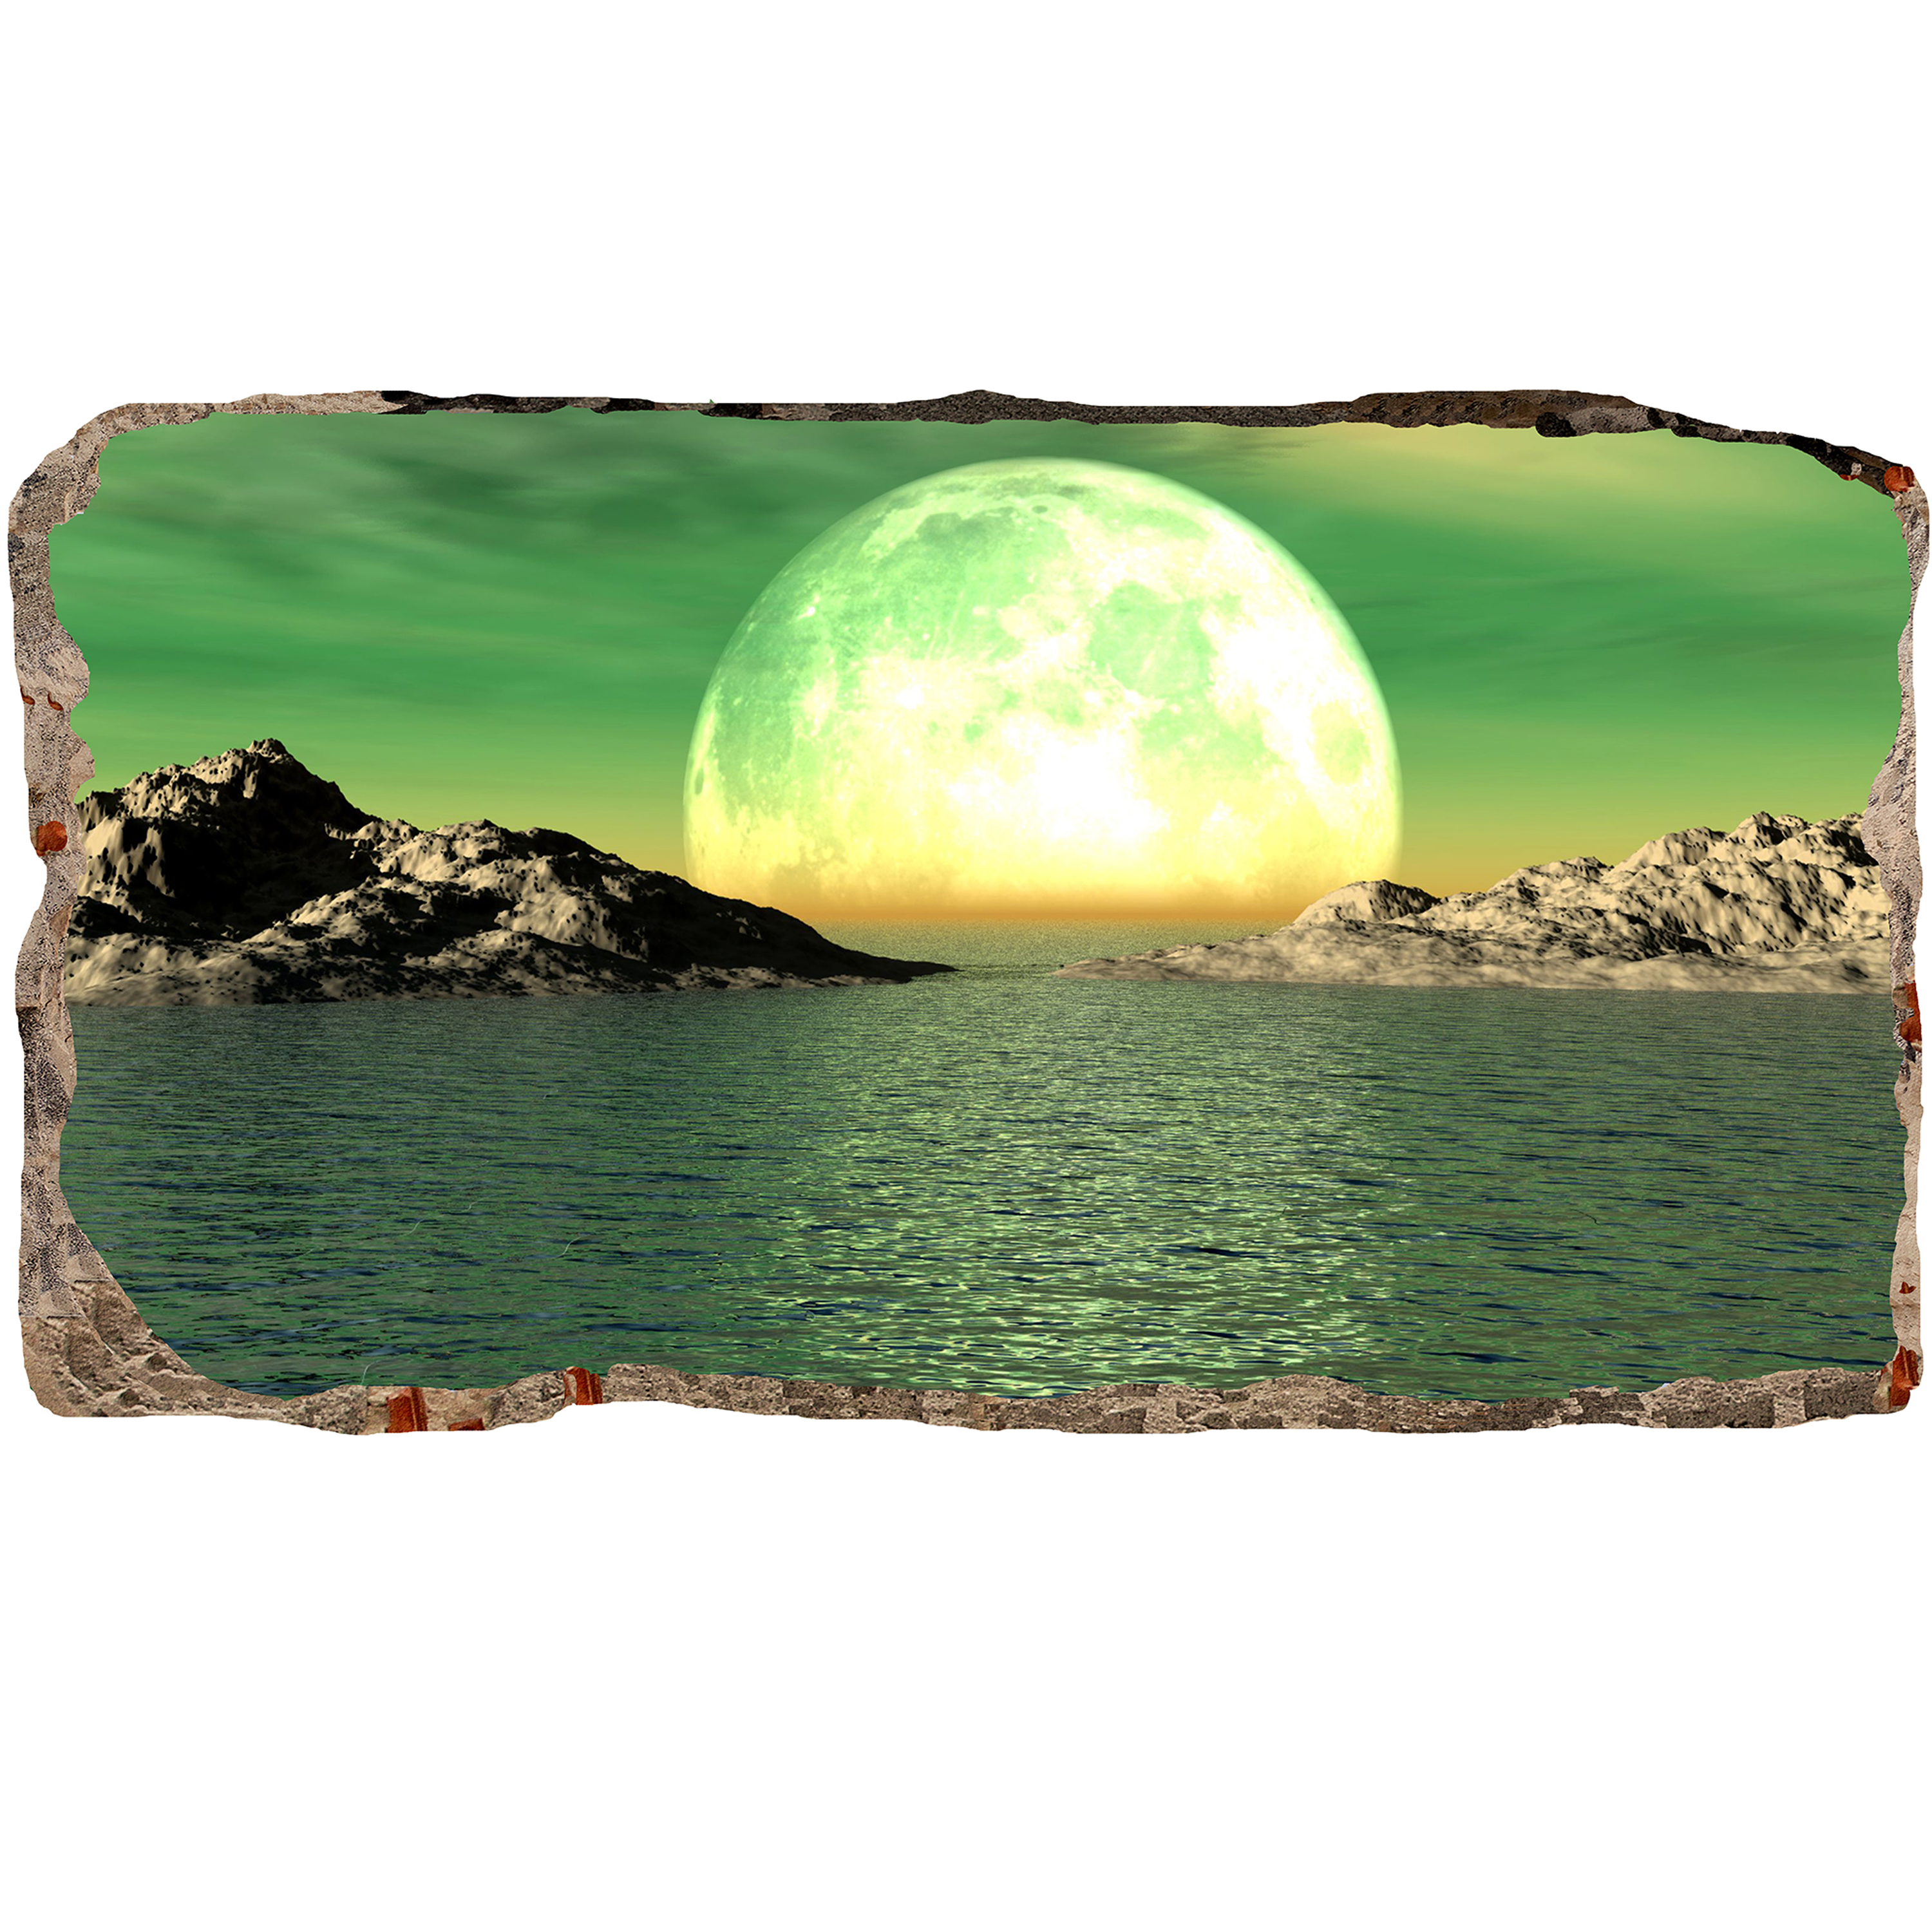 Startonight 3D Mural Wall Art Photo Decor Moon on the Water Amazing Dual View Surprise Medium Wall Mural Wallpaper for Bedroom Beach Landscapes Collection Wall Paper Art 32.28 inch By 59.06 inch - image 3 of 4